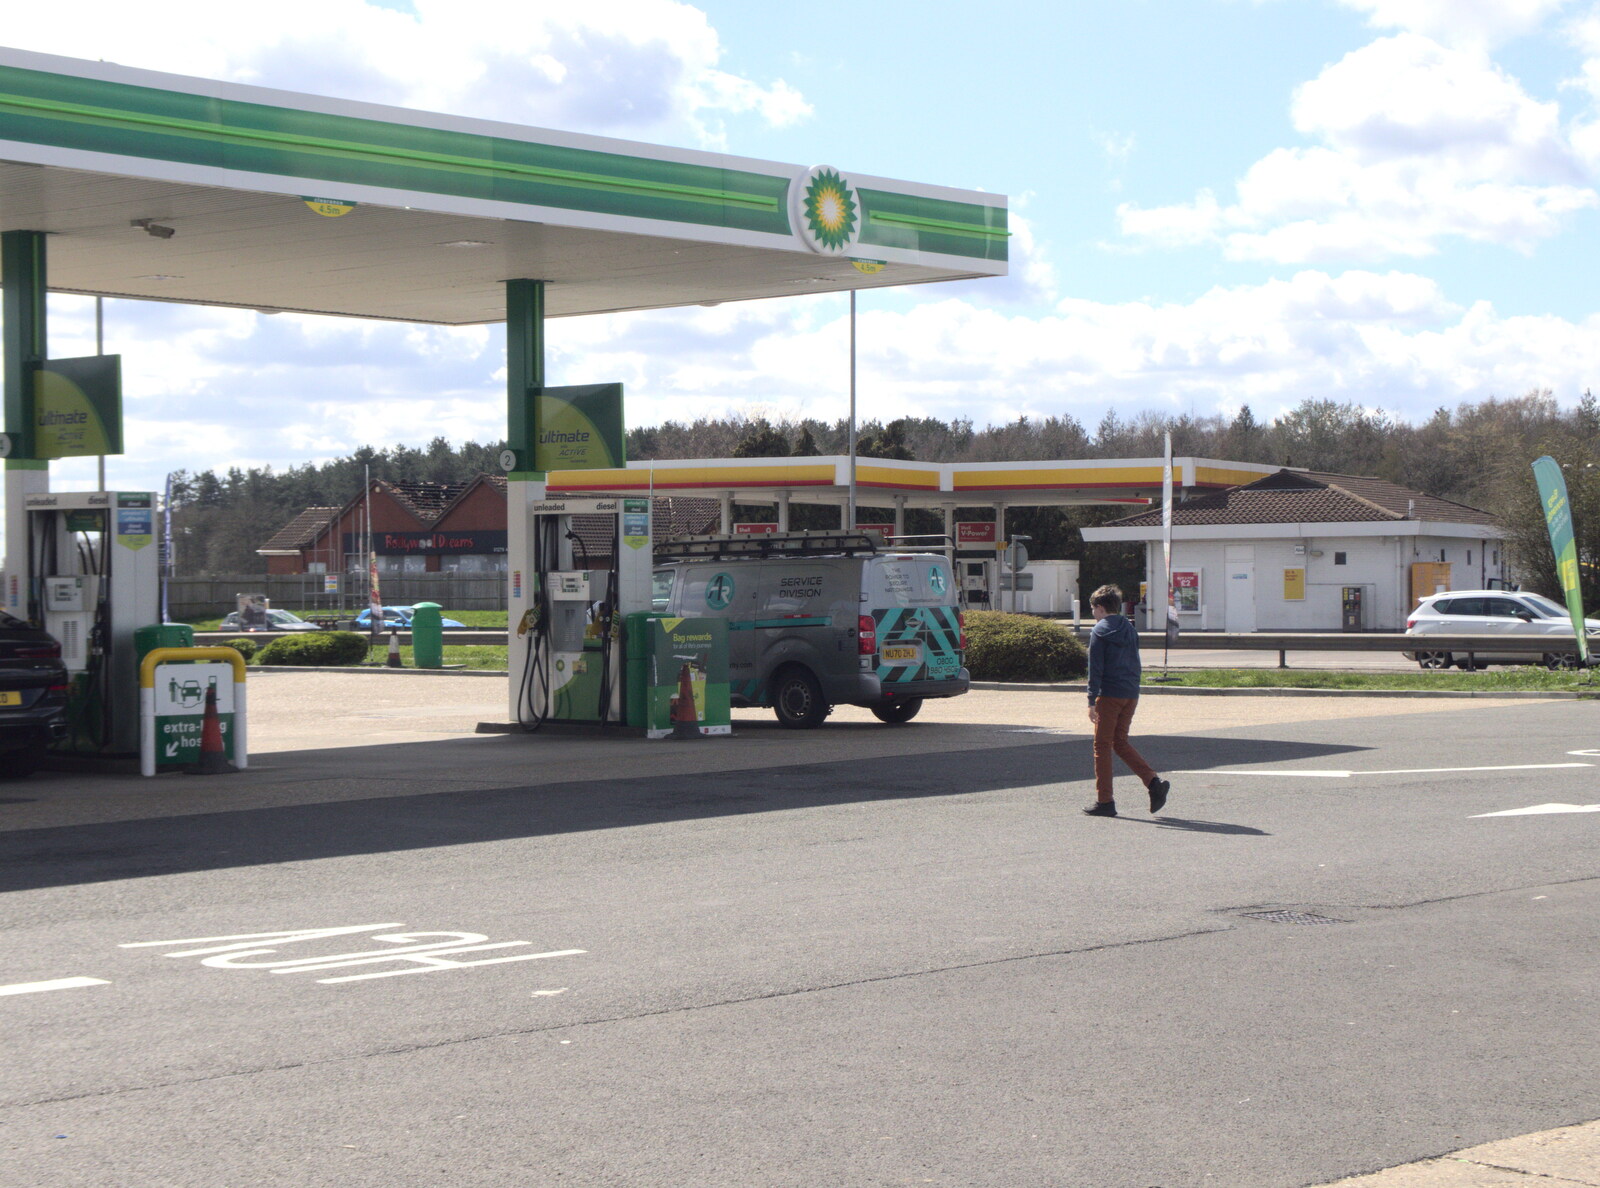 Fred wanders off to the petrol-station shop from Easter in South Zeal and Moretonhampstead, Devon - 9th April